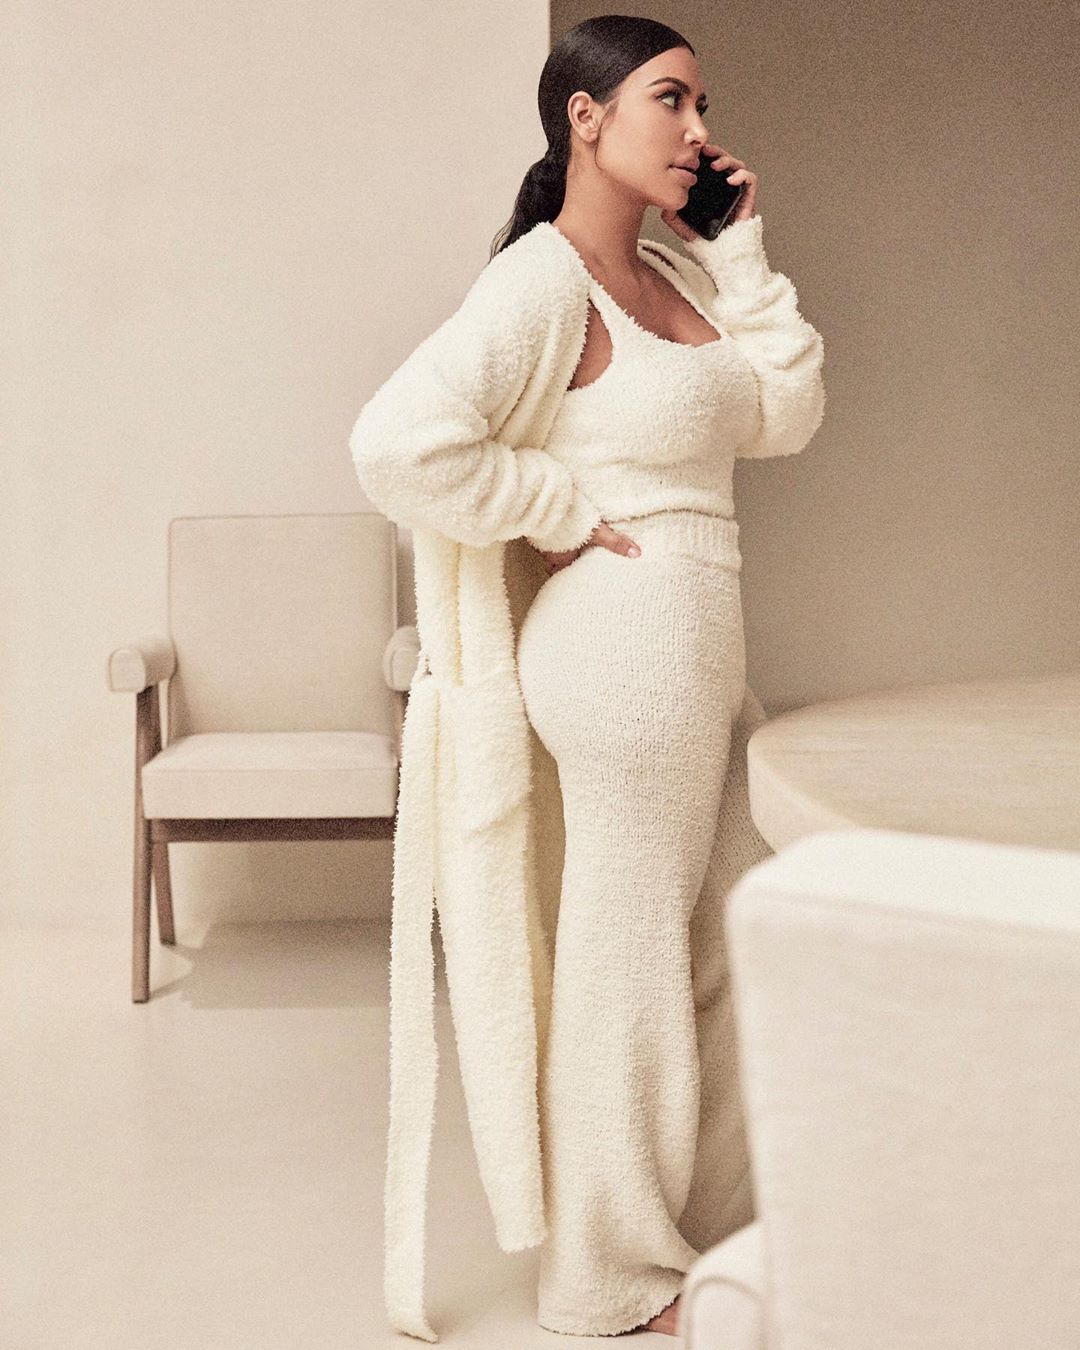 SKIMS on Instagram: Made from ultra-luxe bouclé knit yarn for supreme  comfort, @KimKardashian wears the Cozy Knit Wrap Top and Cozy Knit Pant in  Dusk. Shop Cozy in 8 styles, 5 colors